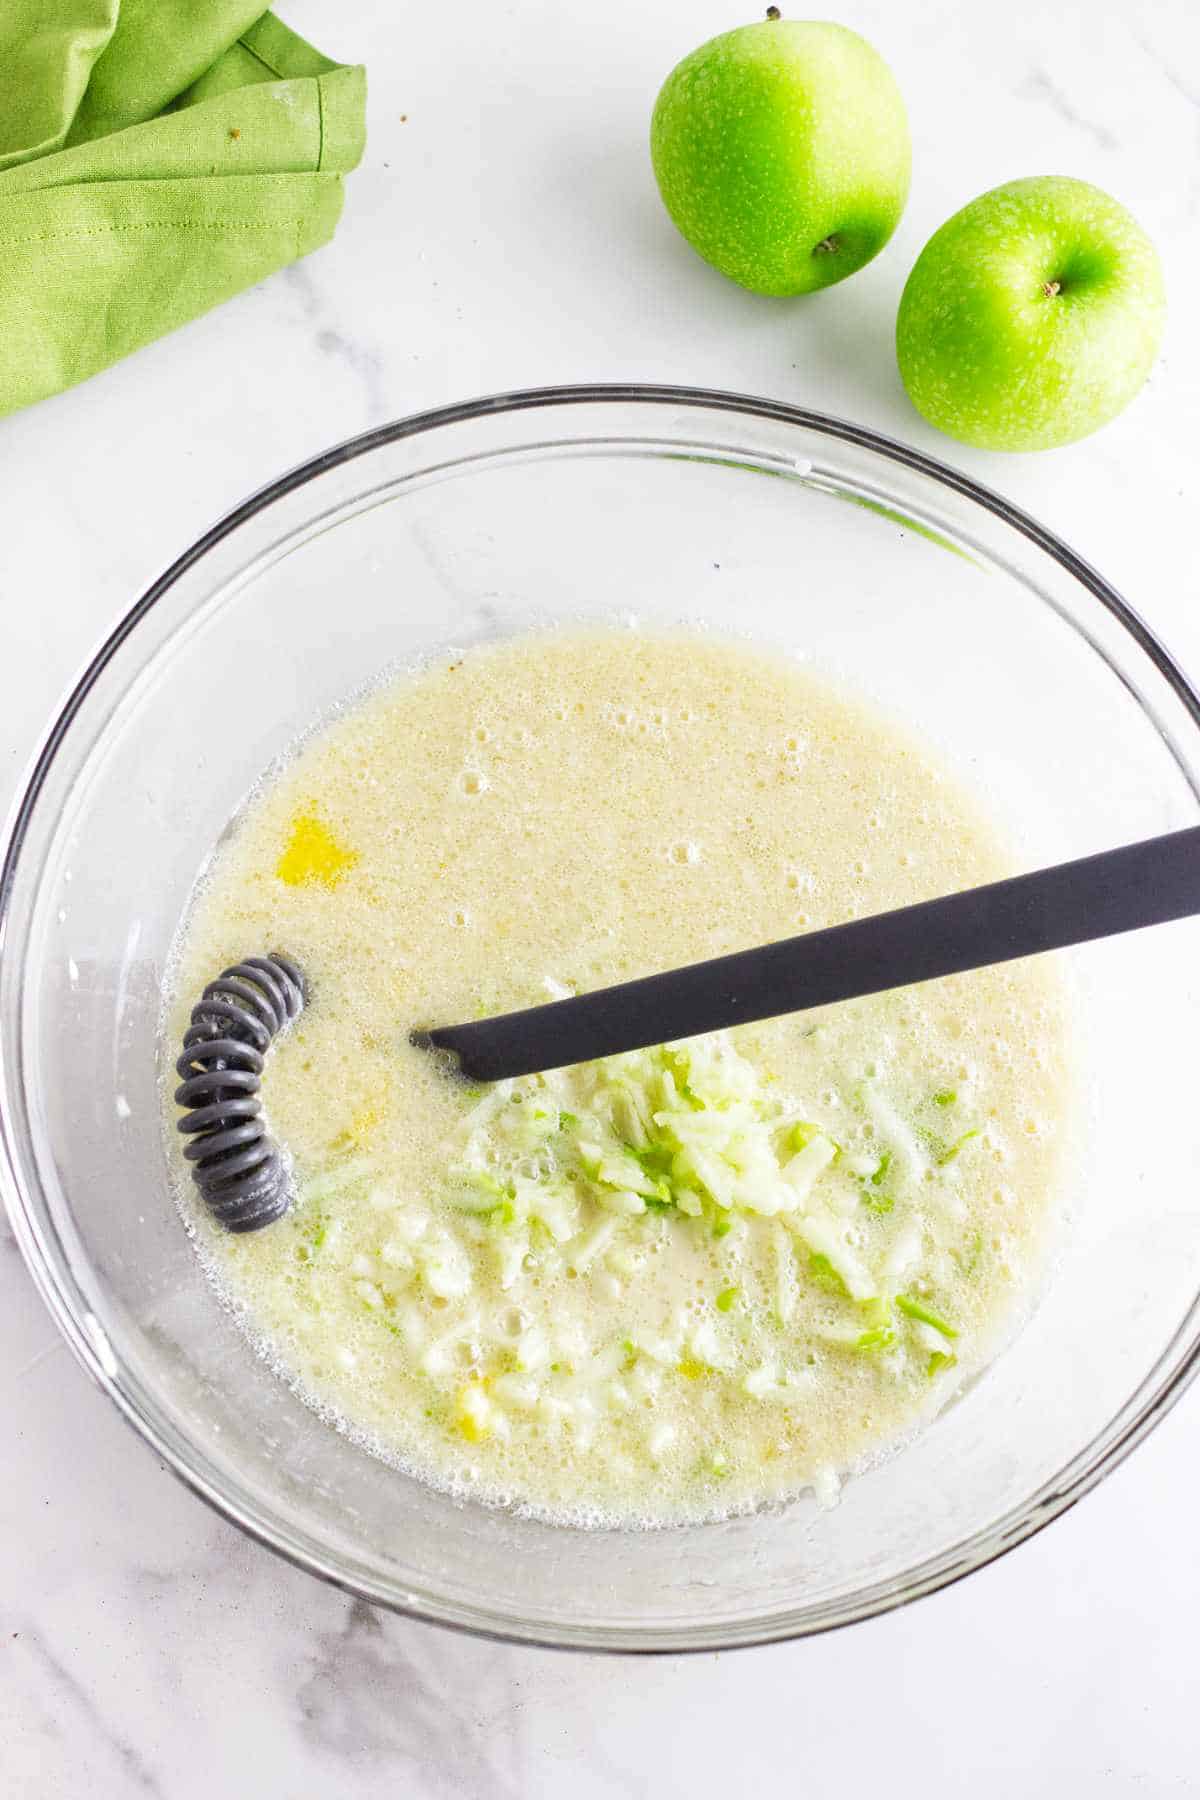 vegetable oil and grated apples mixed into liquid in a bowl.